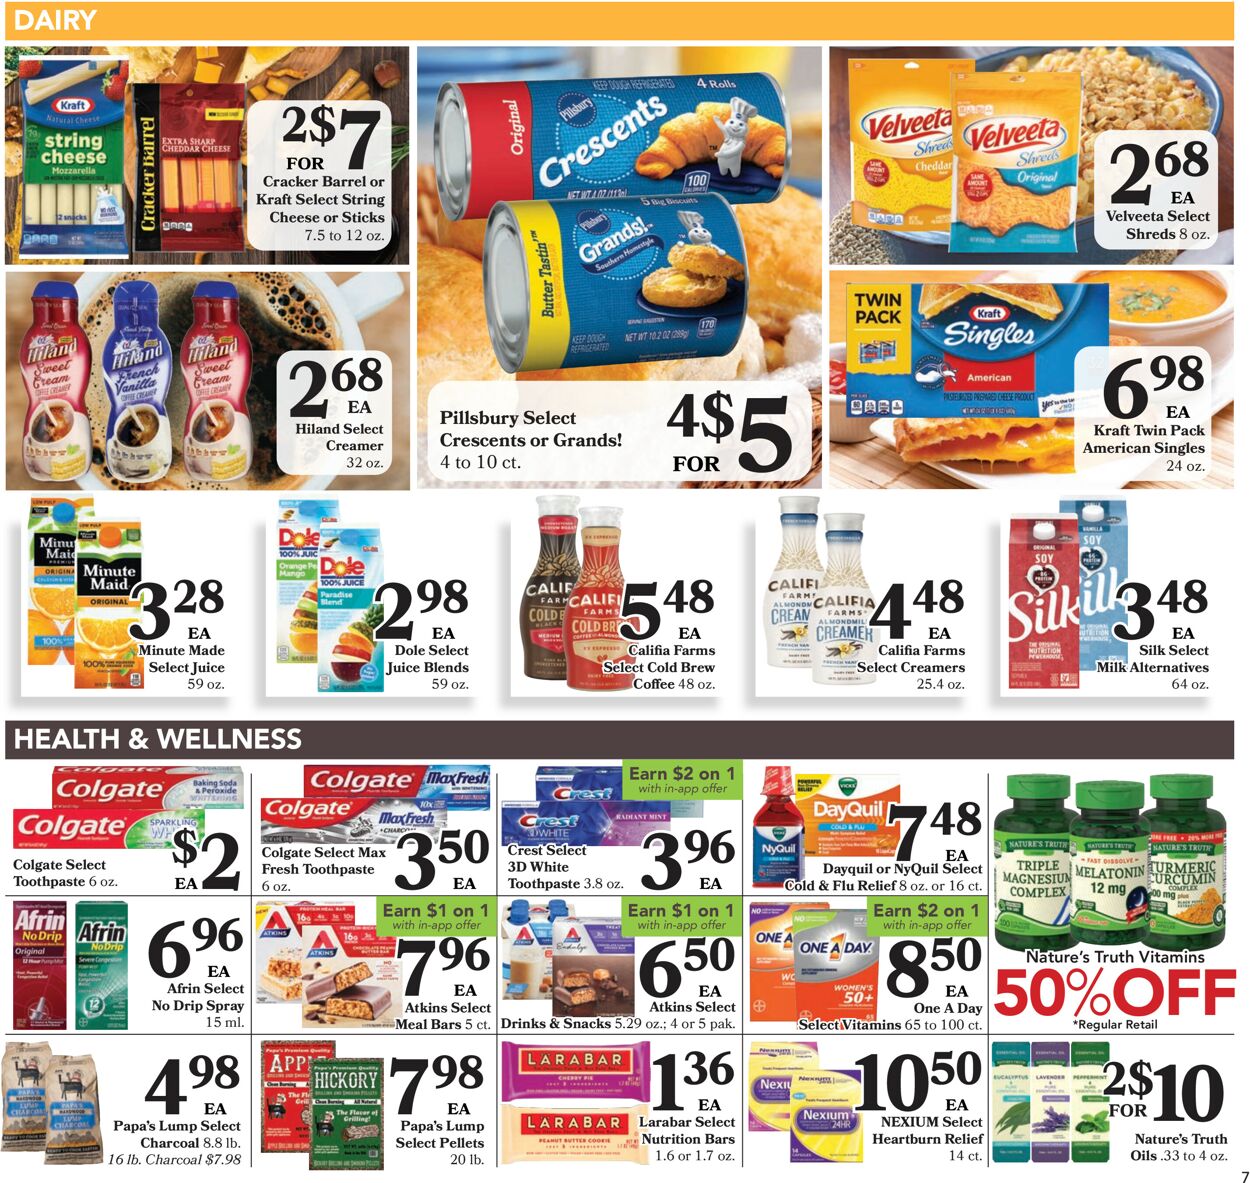 Catalogue Harps Foods from 09/07/2022